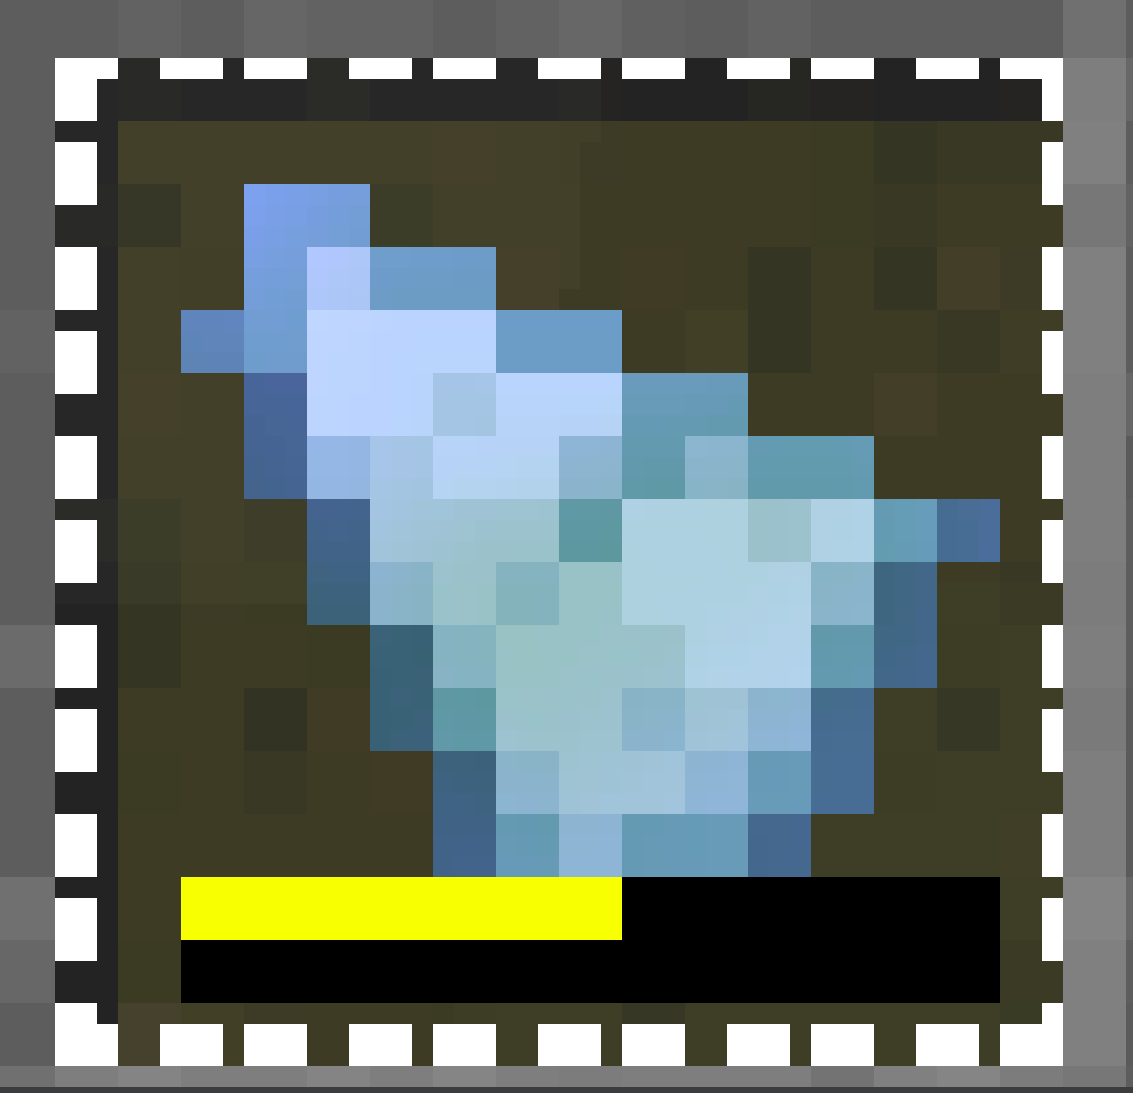 Skyblocker Mod (1.21, 1.20.1) - Many Useful Features for Hypixel SkyBlock 8